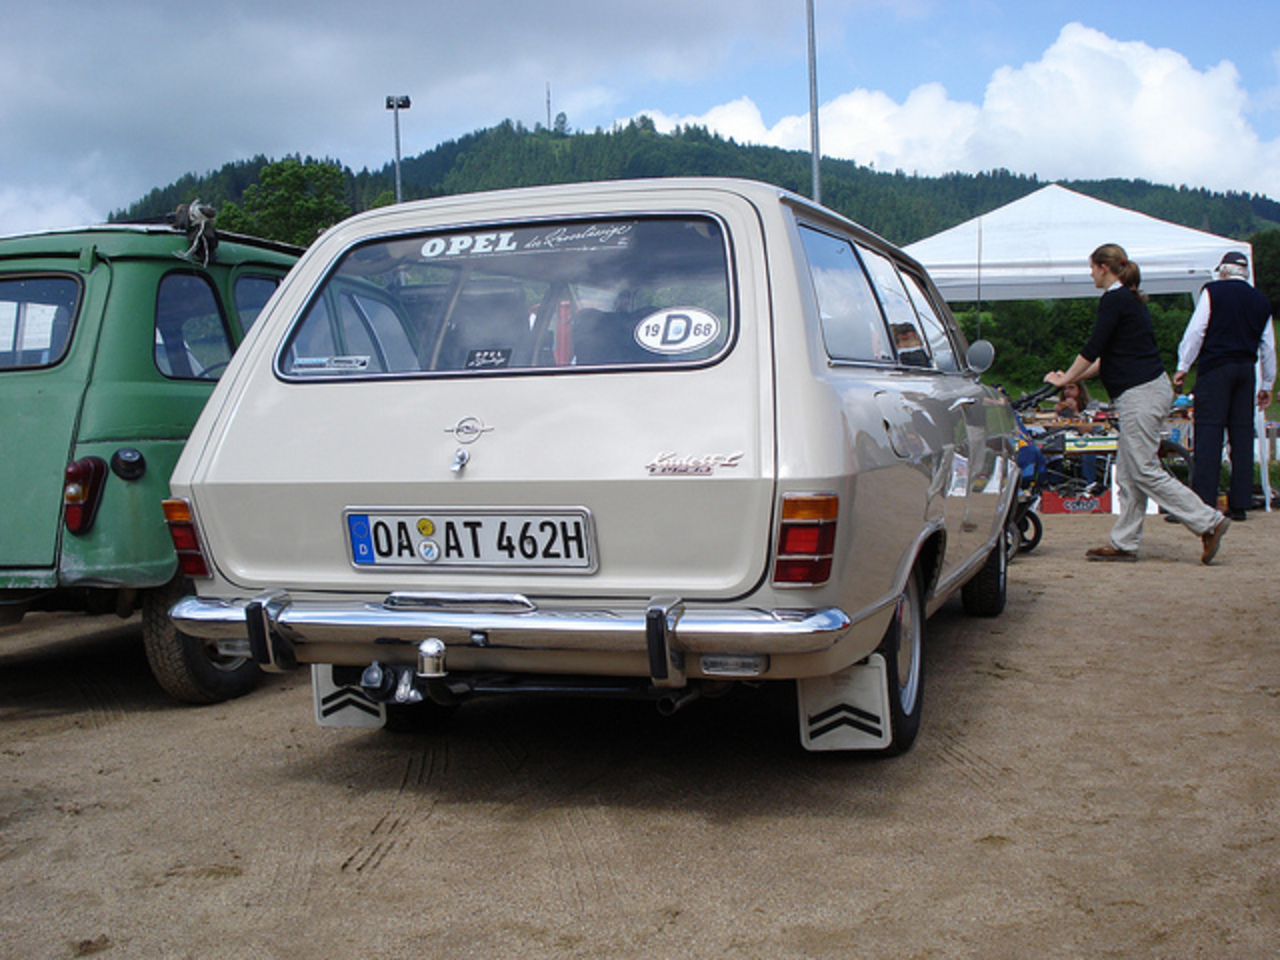 Flickr: The Opel cars Pool